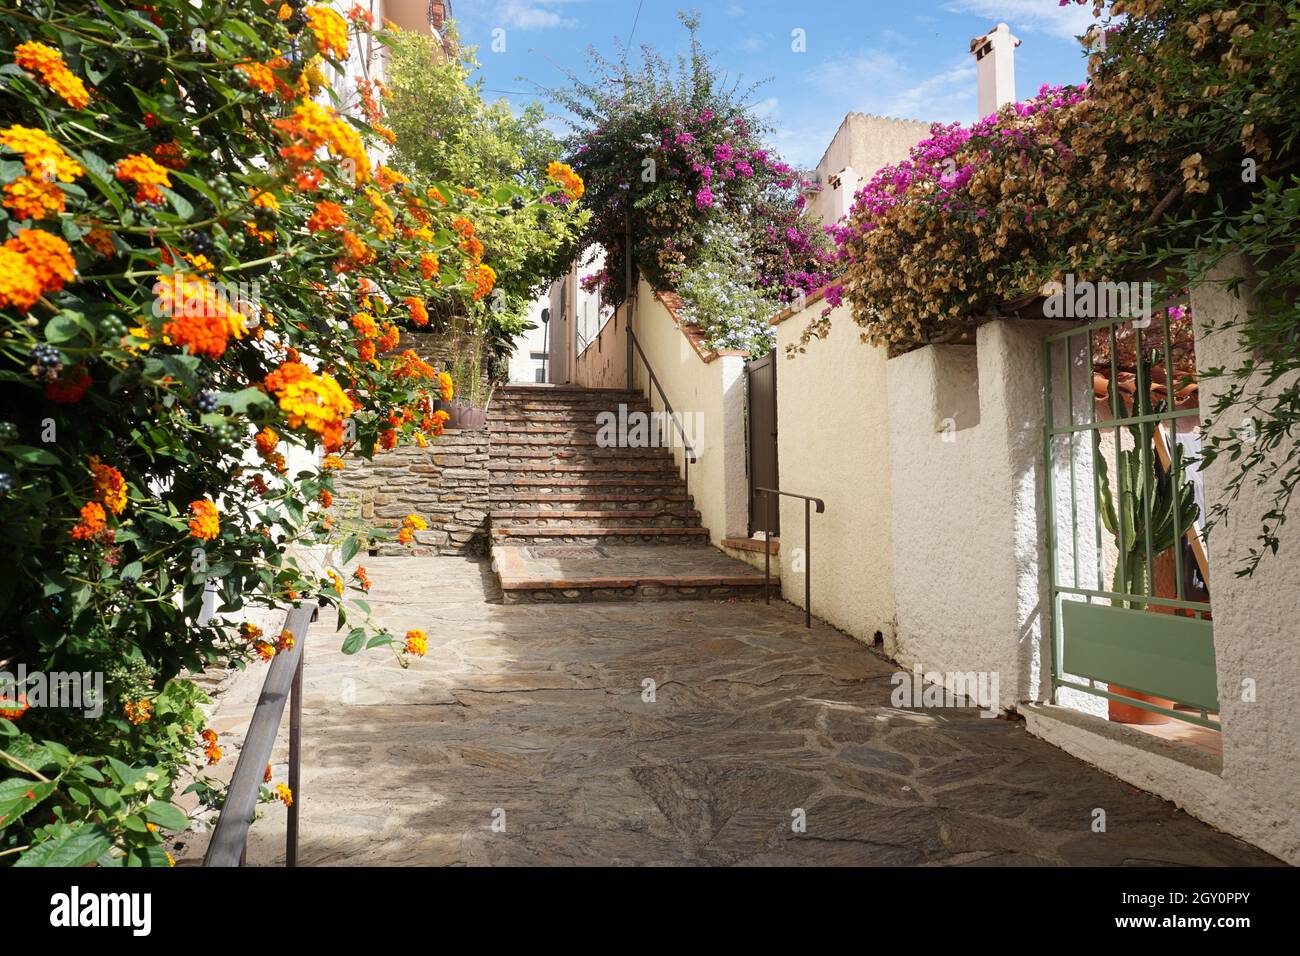 Street adorned with flowers in Mediterranean seaside town of Banyuls-sur-Mer, Pyrénées-Orientales  department, southern France Stock Photo